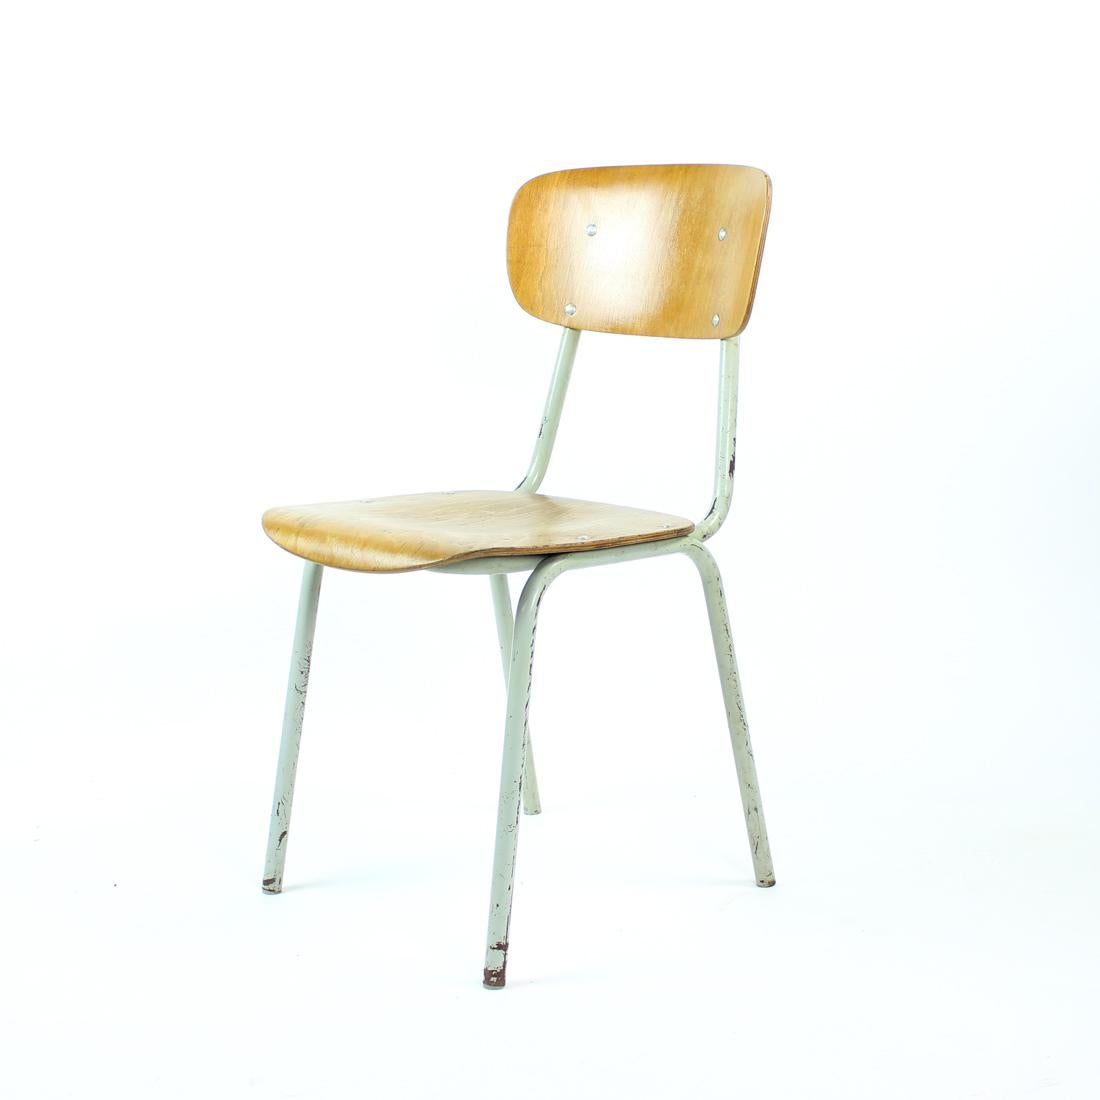 Mid-20th Century School Chair In Metal And Plywood, Kovona, Czechoslovakia 1960s For Sale